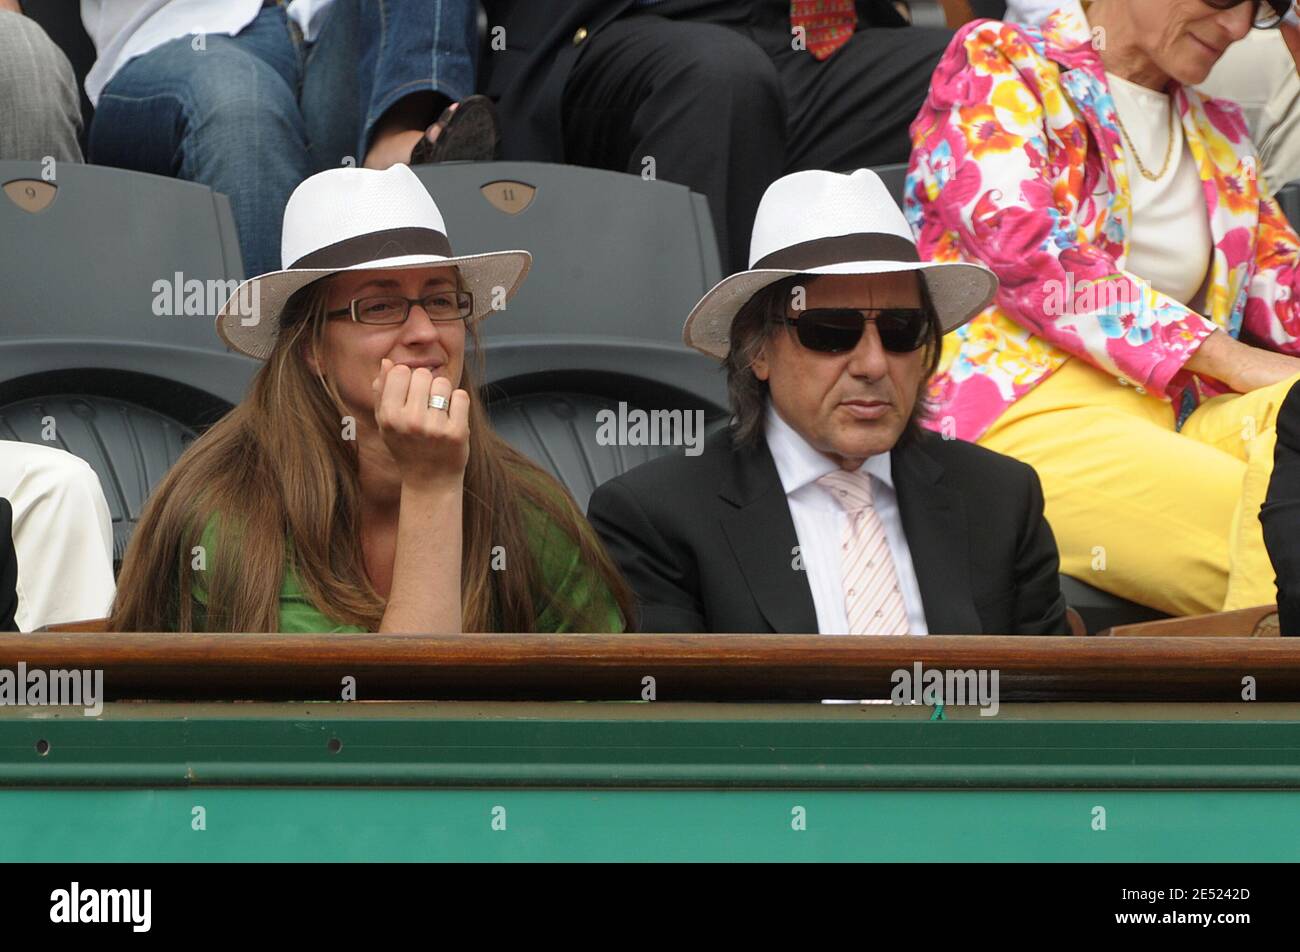 Mary Pierce and Ilie Nastase attend the men's final match of the French Open, played at the Roland Garros stadium in Paris, France, on June 8, 2008. Spain's Nadal won against Switzerland's Federer 6-1, 6-3, 6-0. Photo by Gorassini-Nebinger/ABACAPRESS.COM Stock Photo